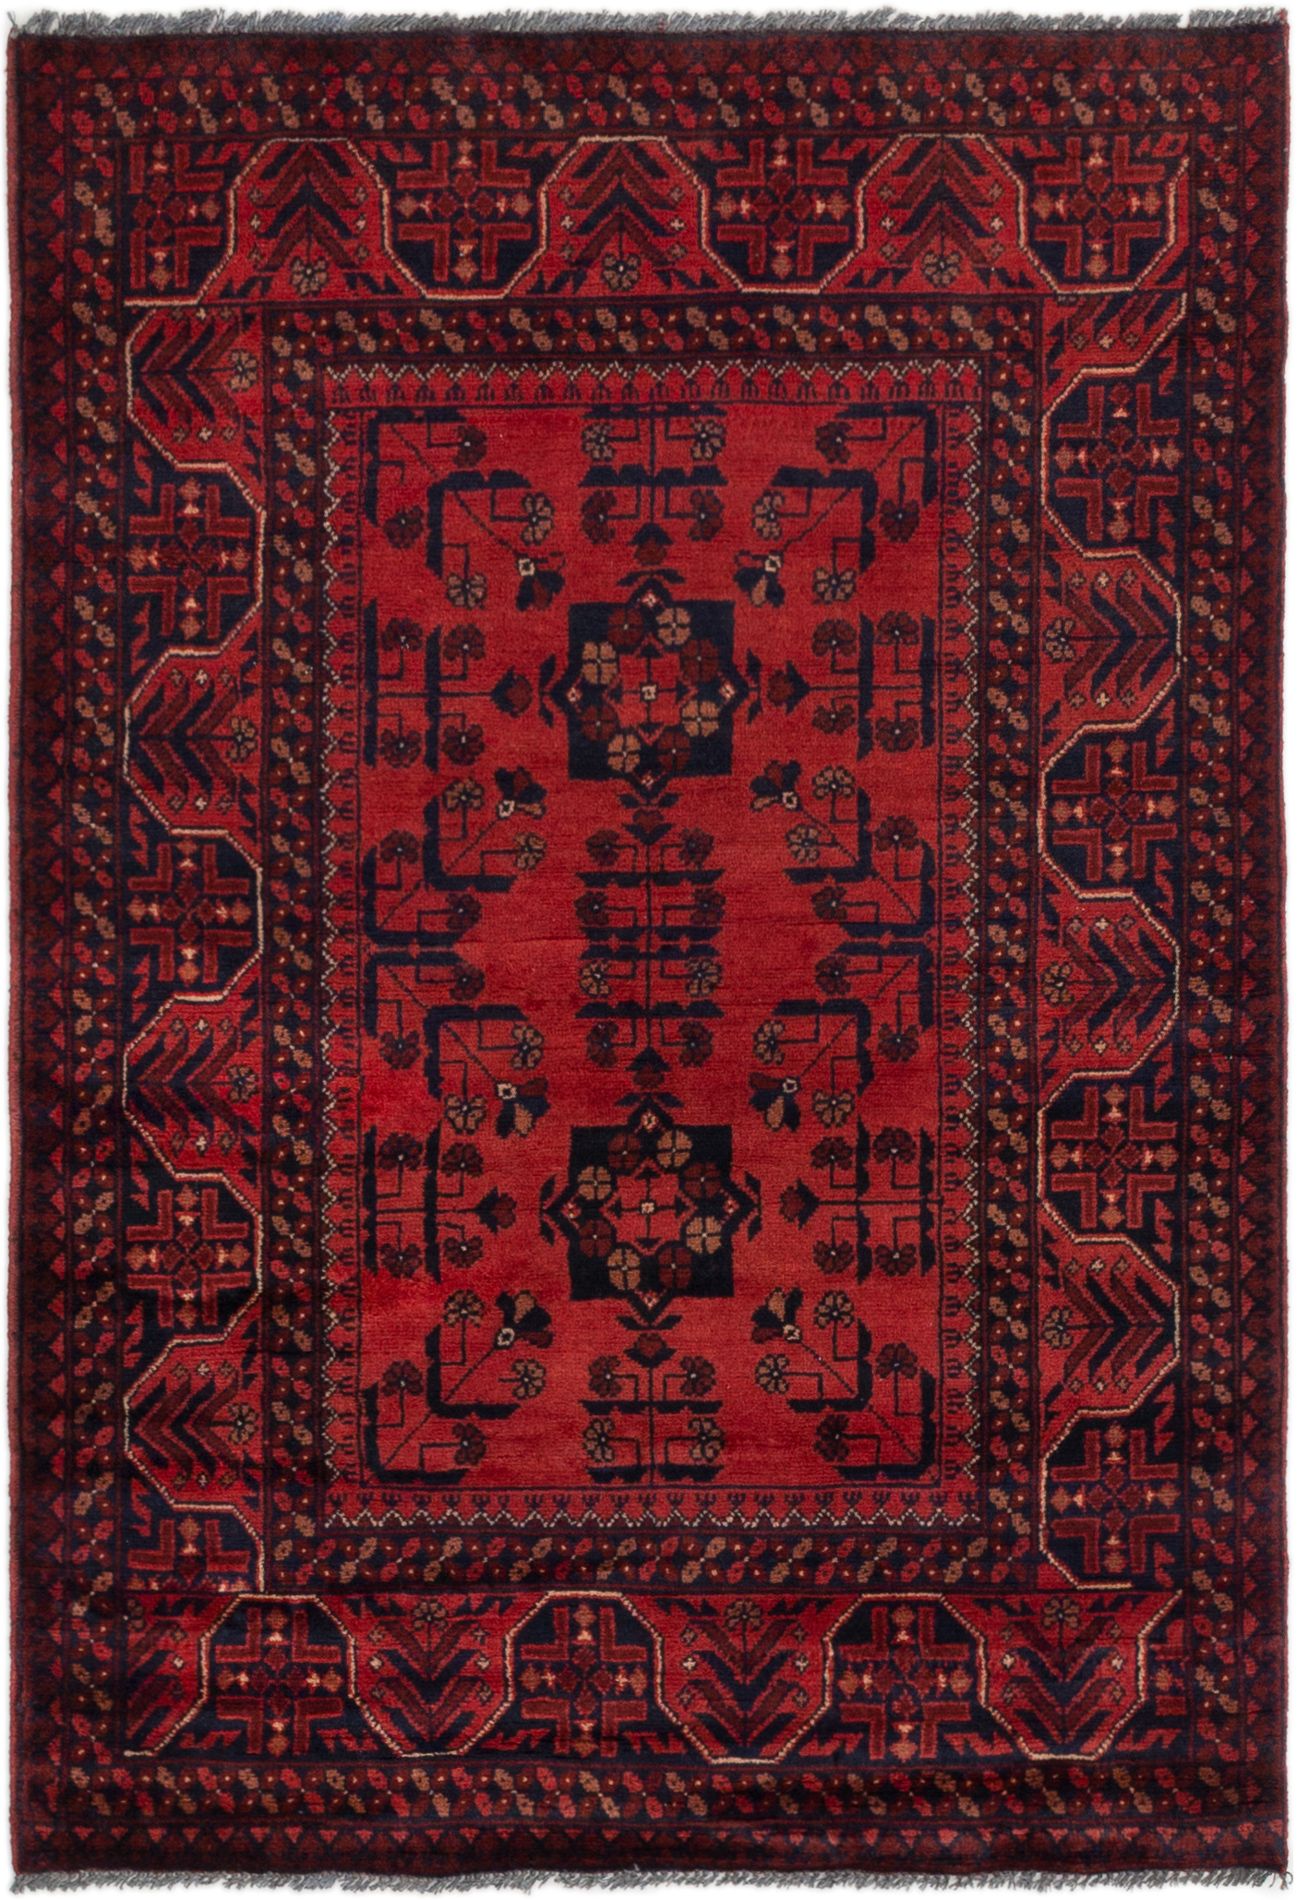 Hand-knotted Finest Khal Mohammadi Red Wool Rug 3'4" x 4'10"  Size: 3'4" x 4'10"  